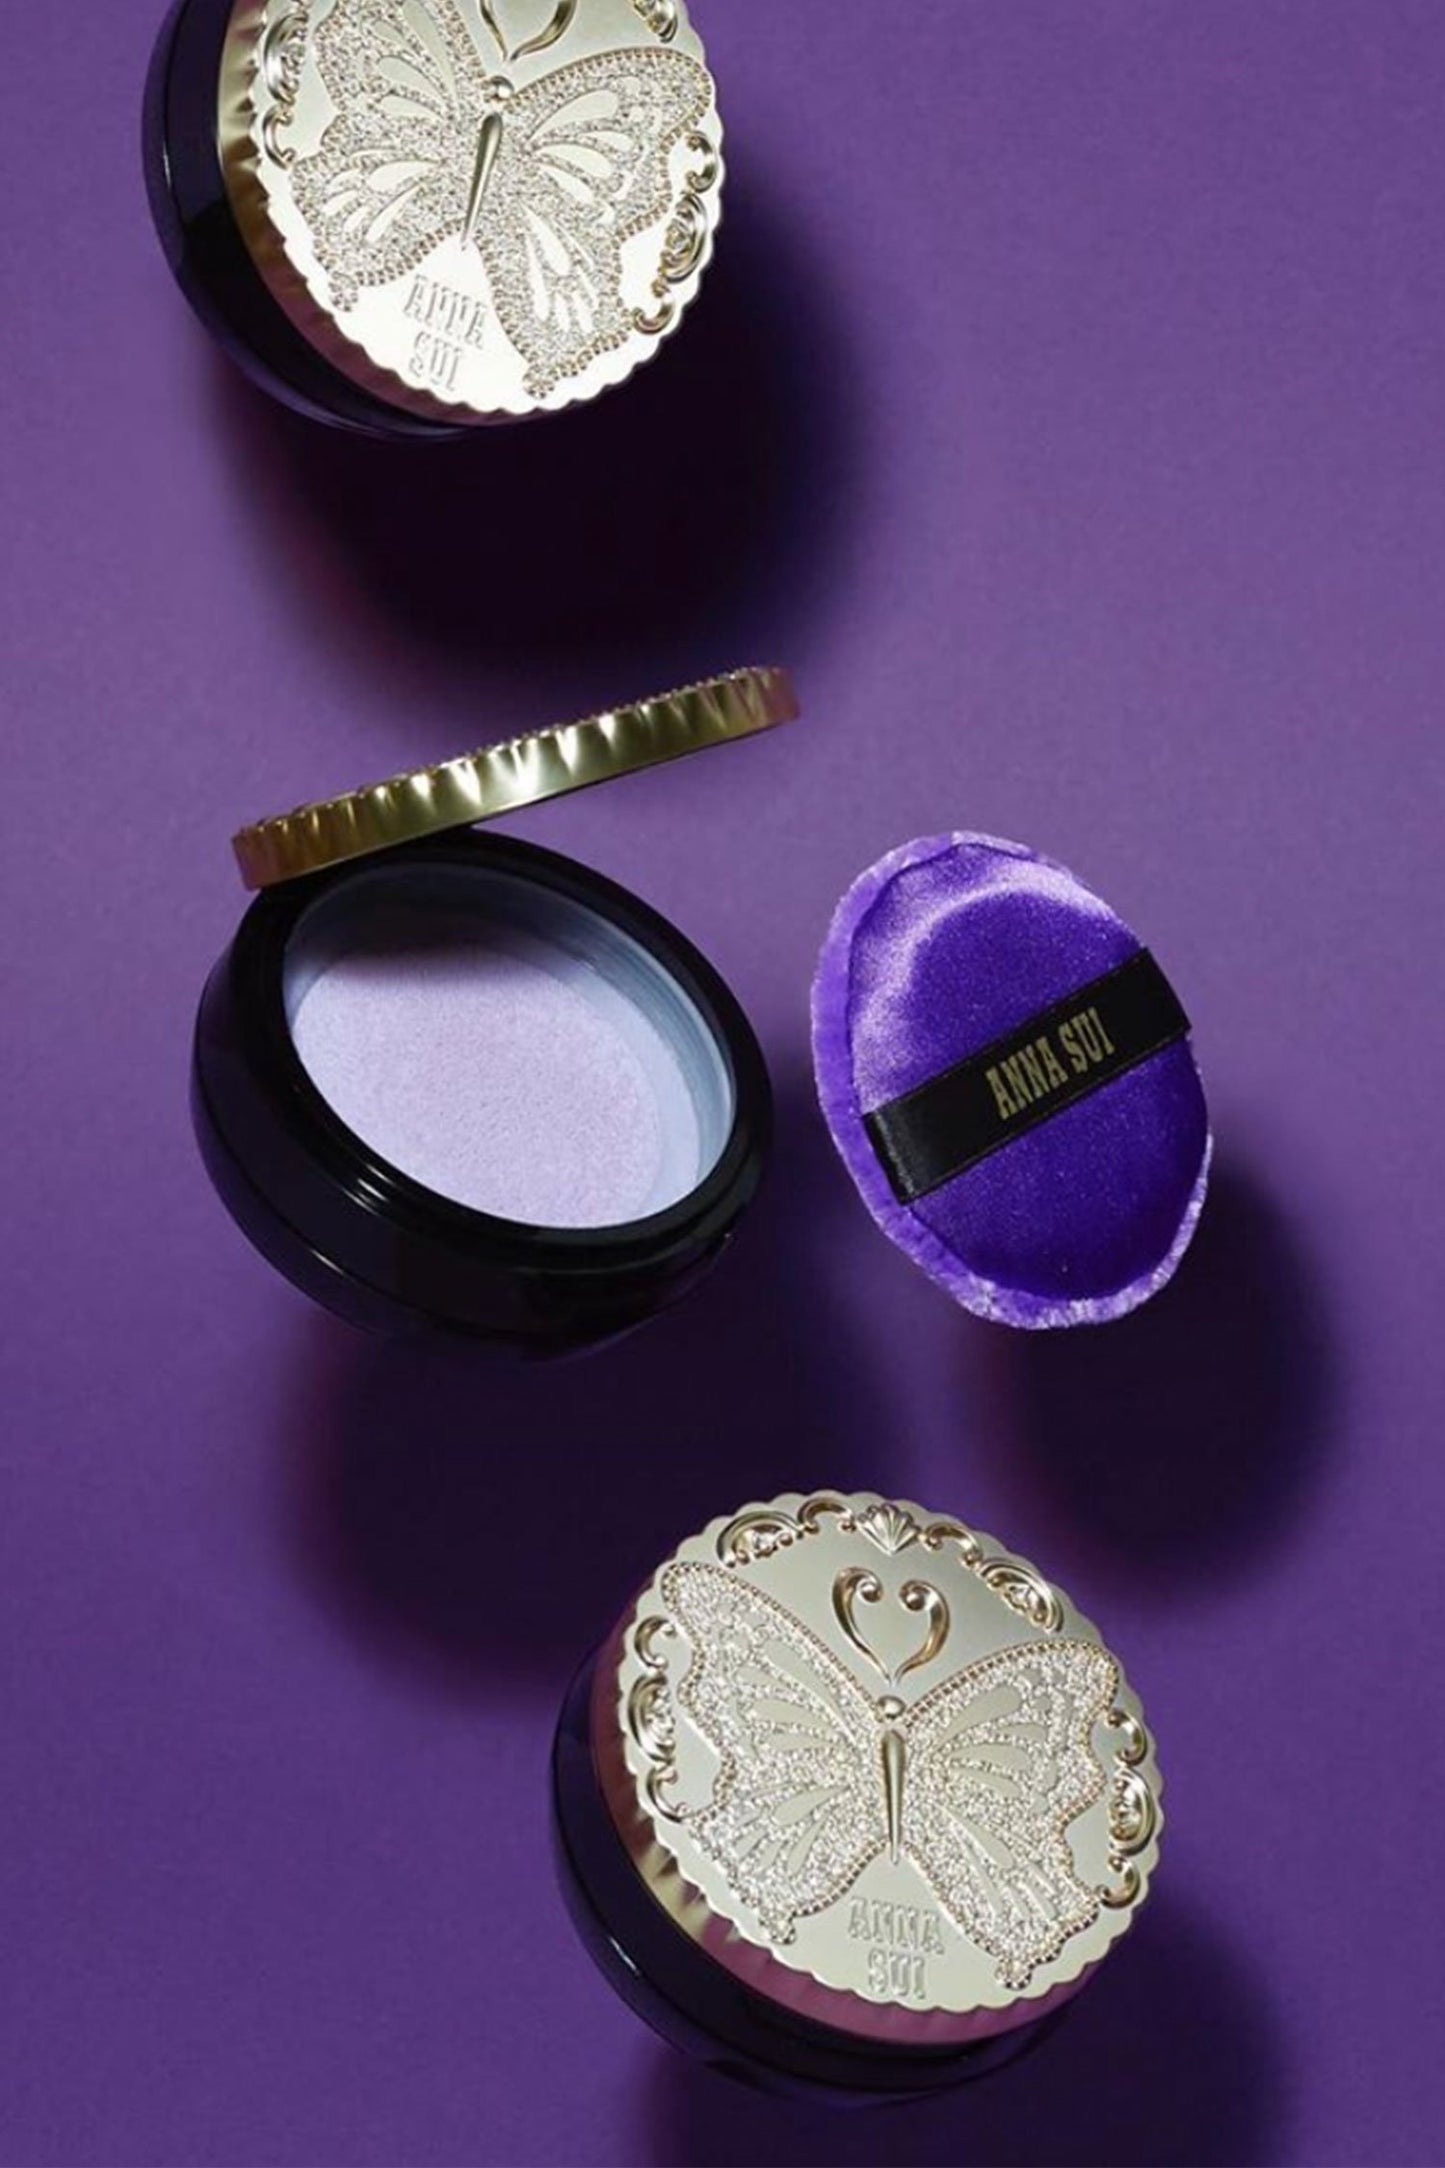 3-cases, showing a closed Golden lid and black bottom, and open with mirror and purple pad